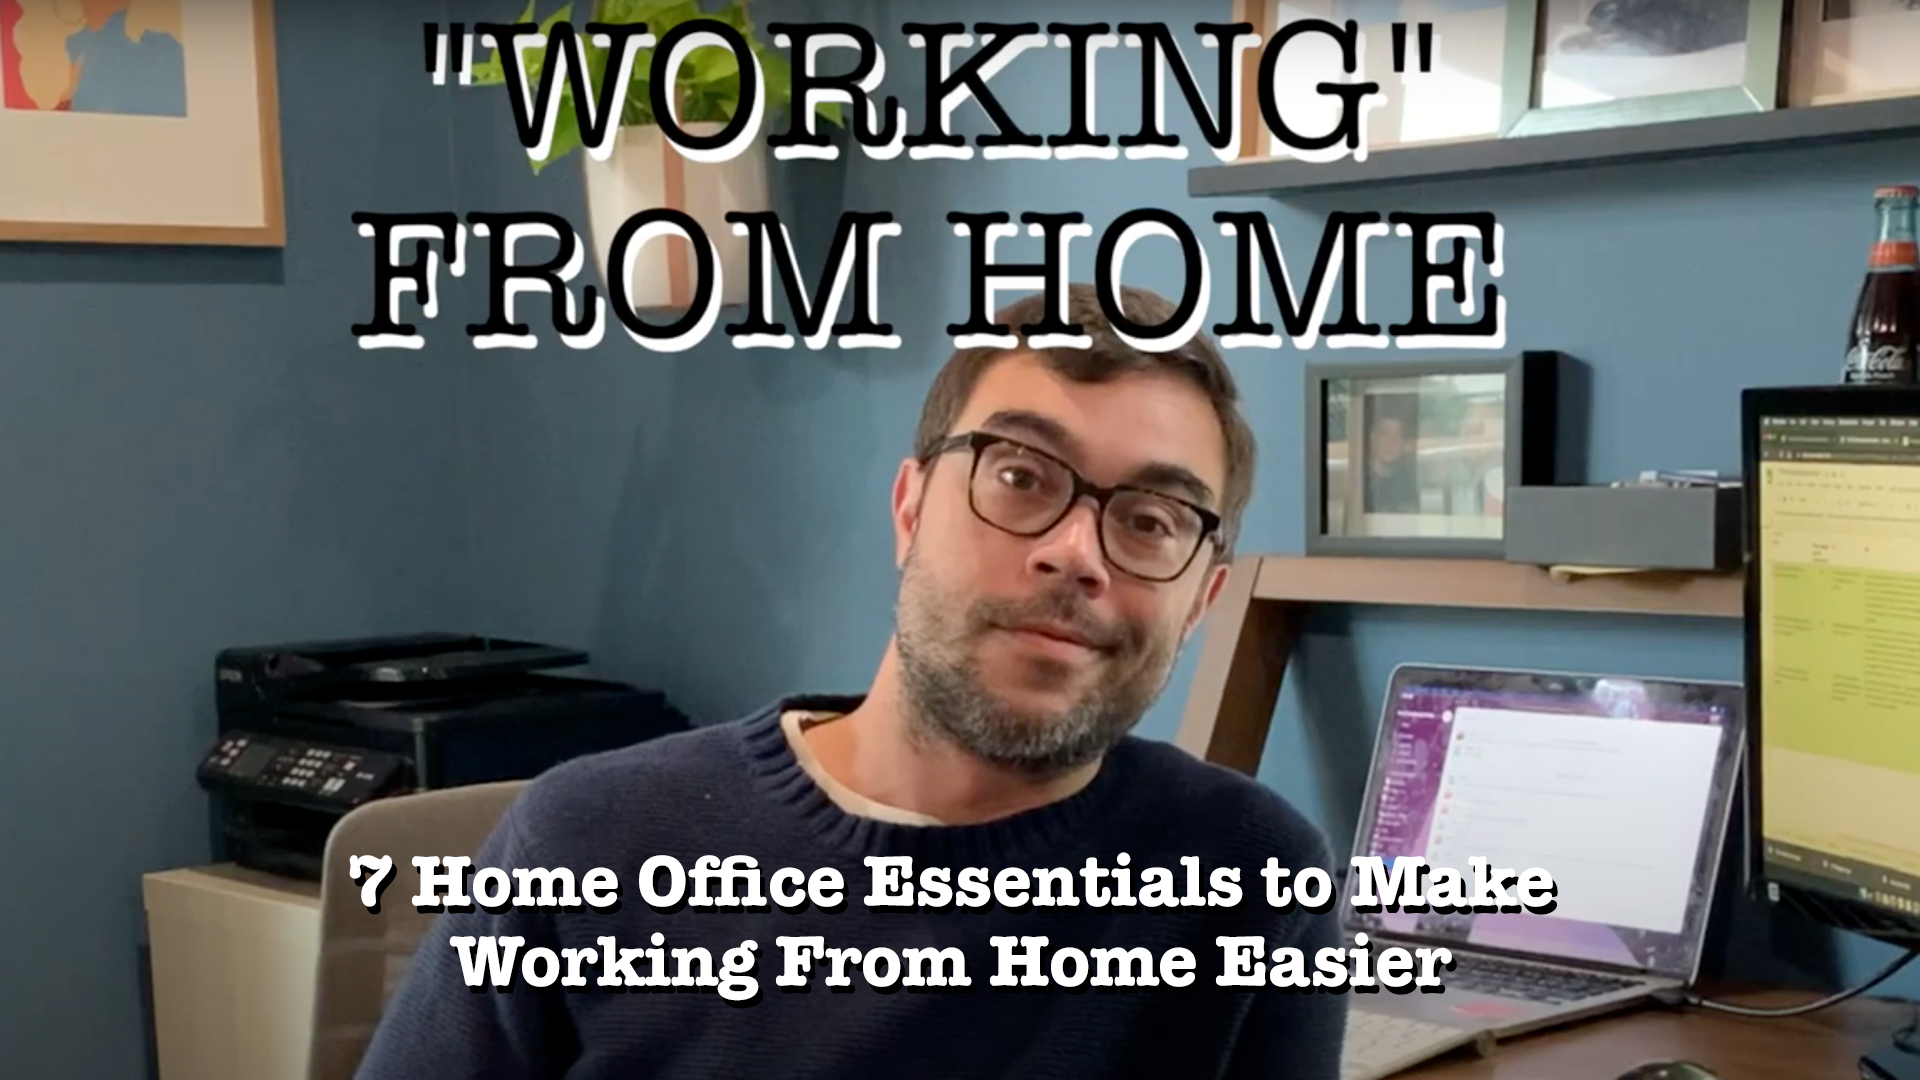 7 Home Office Essentials to Make Working From Home Easier